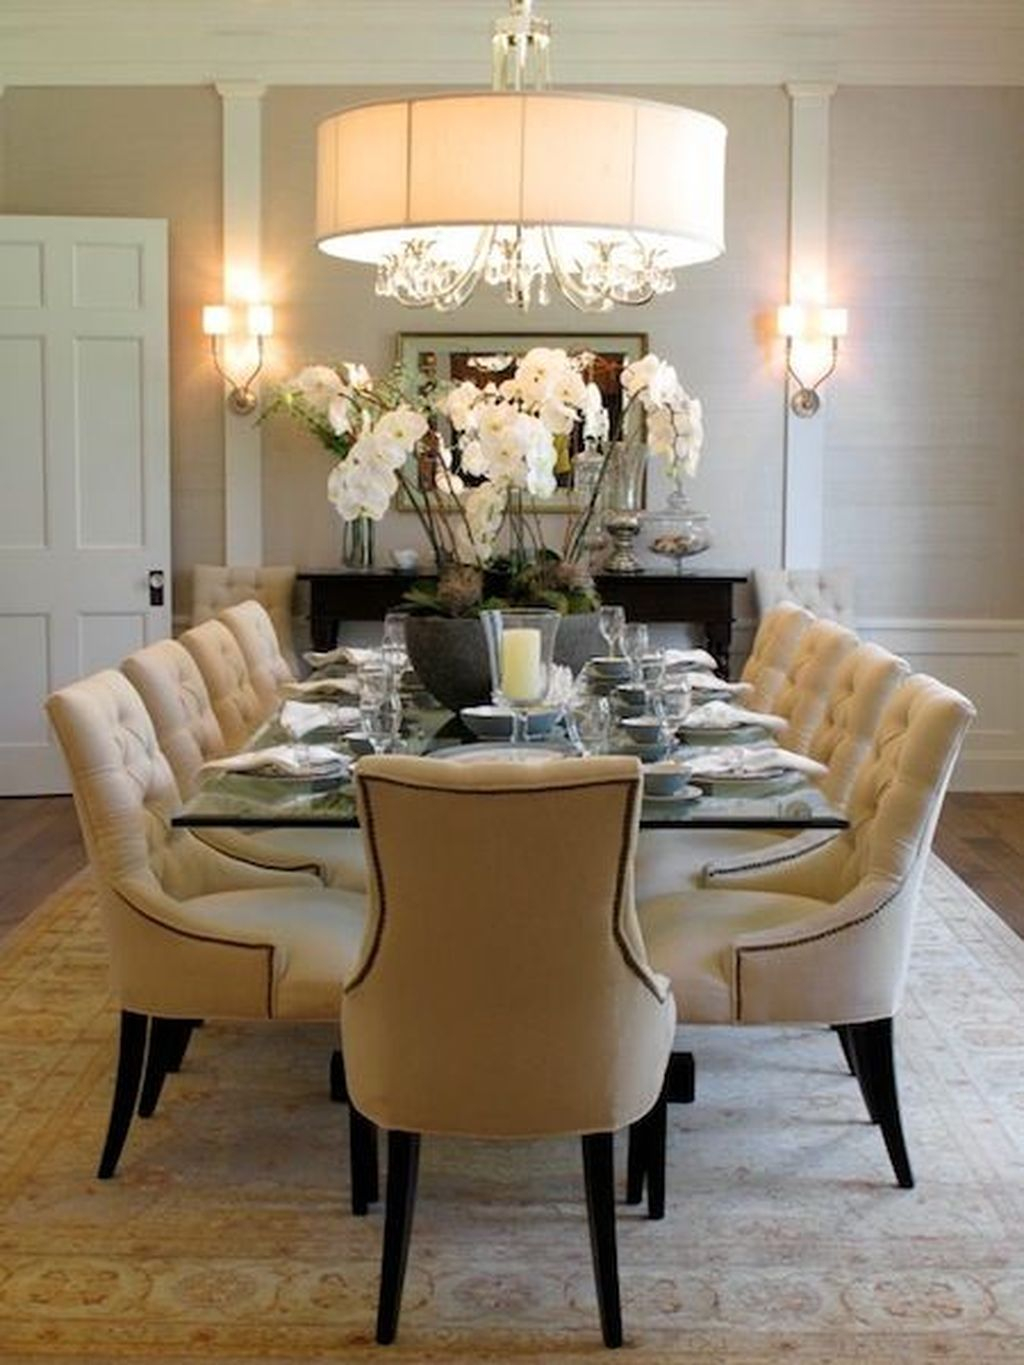 Awesome Lighting For Dining Room Design Ideas 23